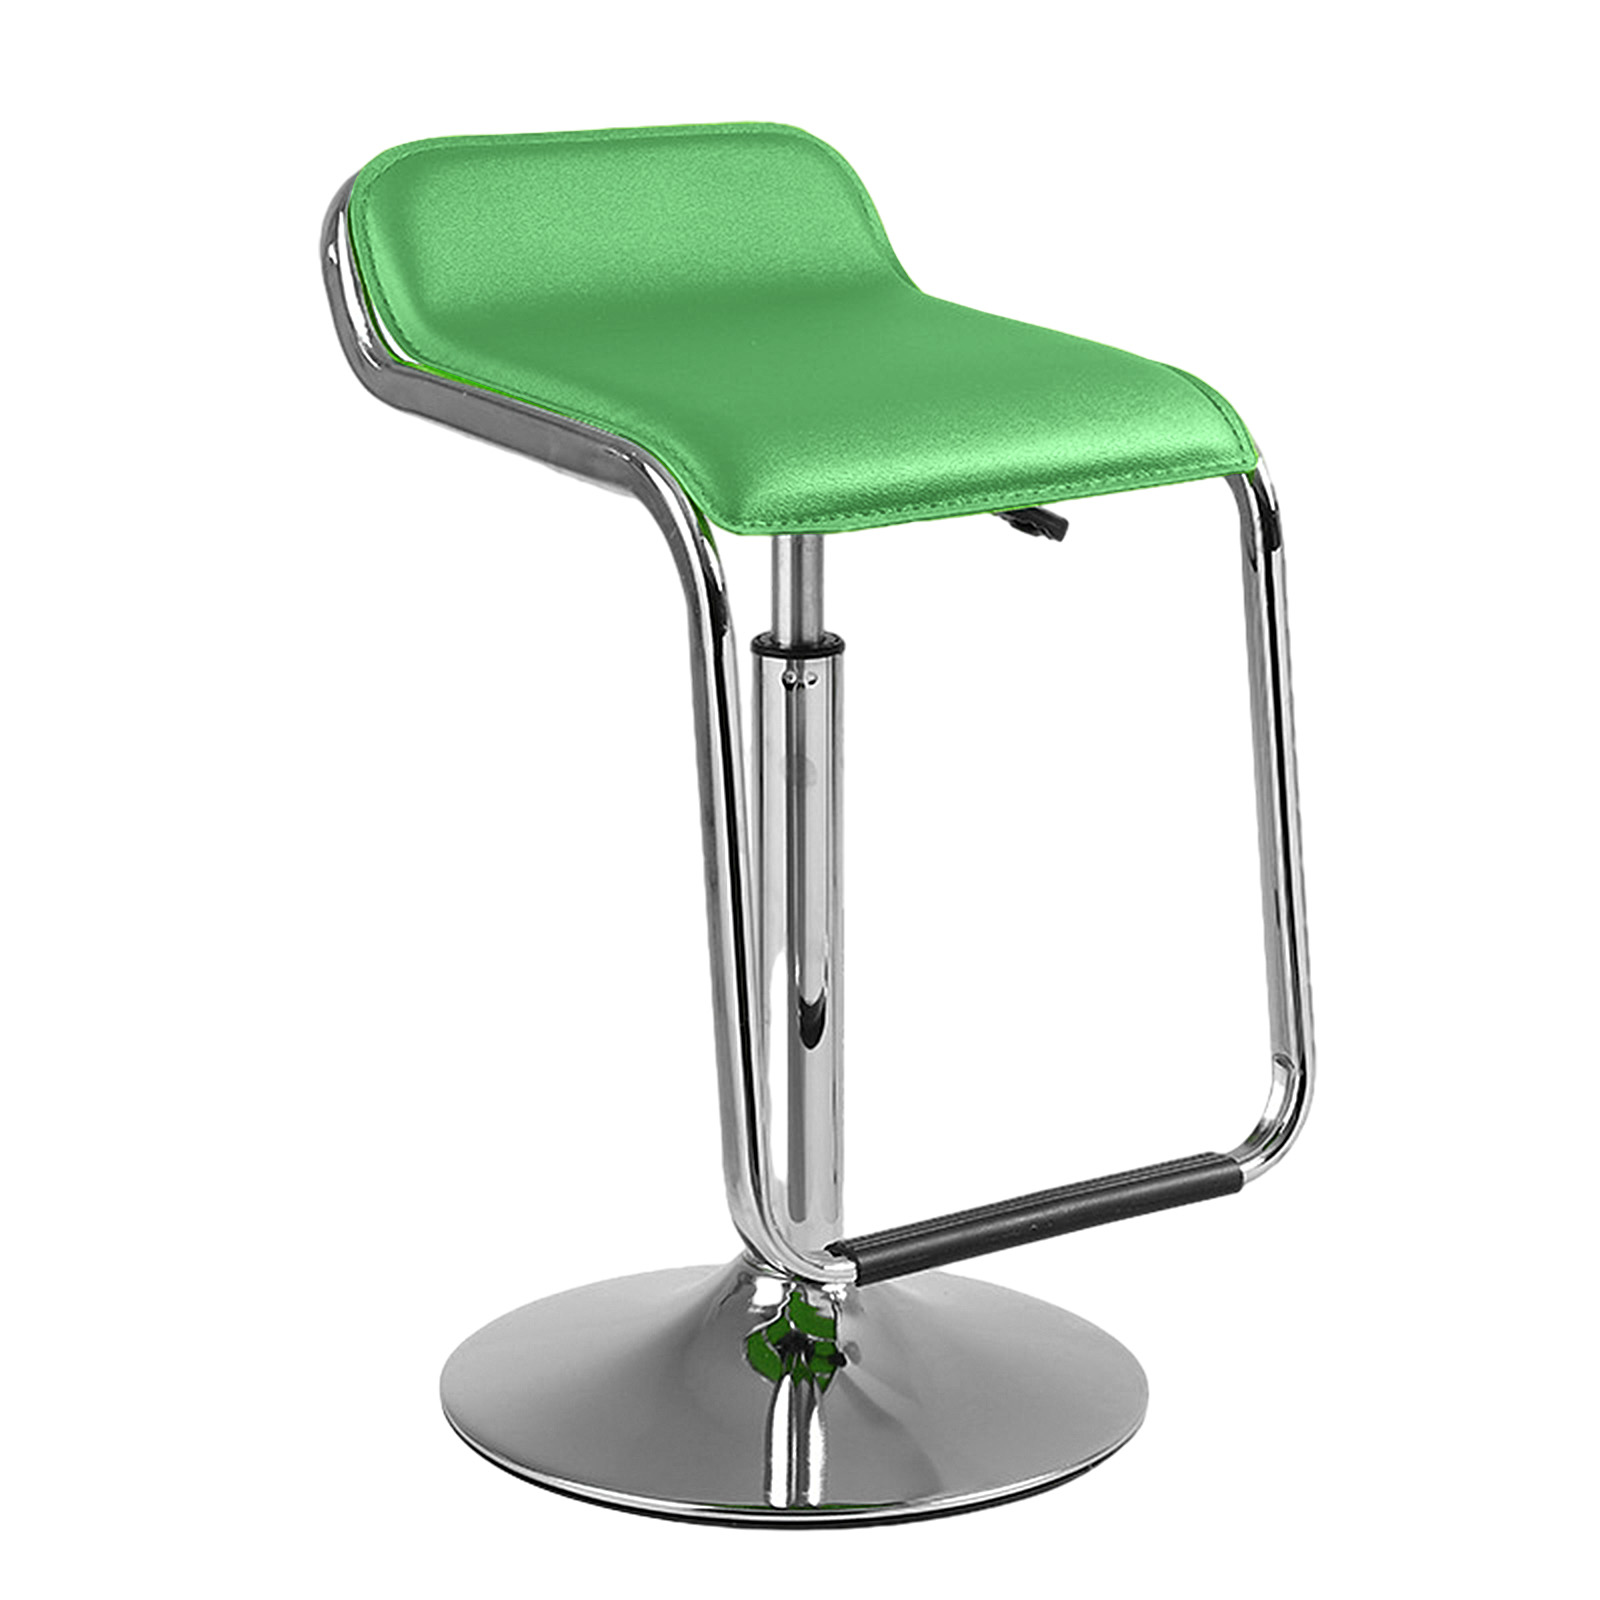 S chair round drag - Green